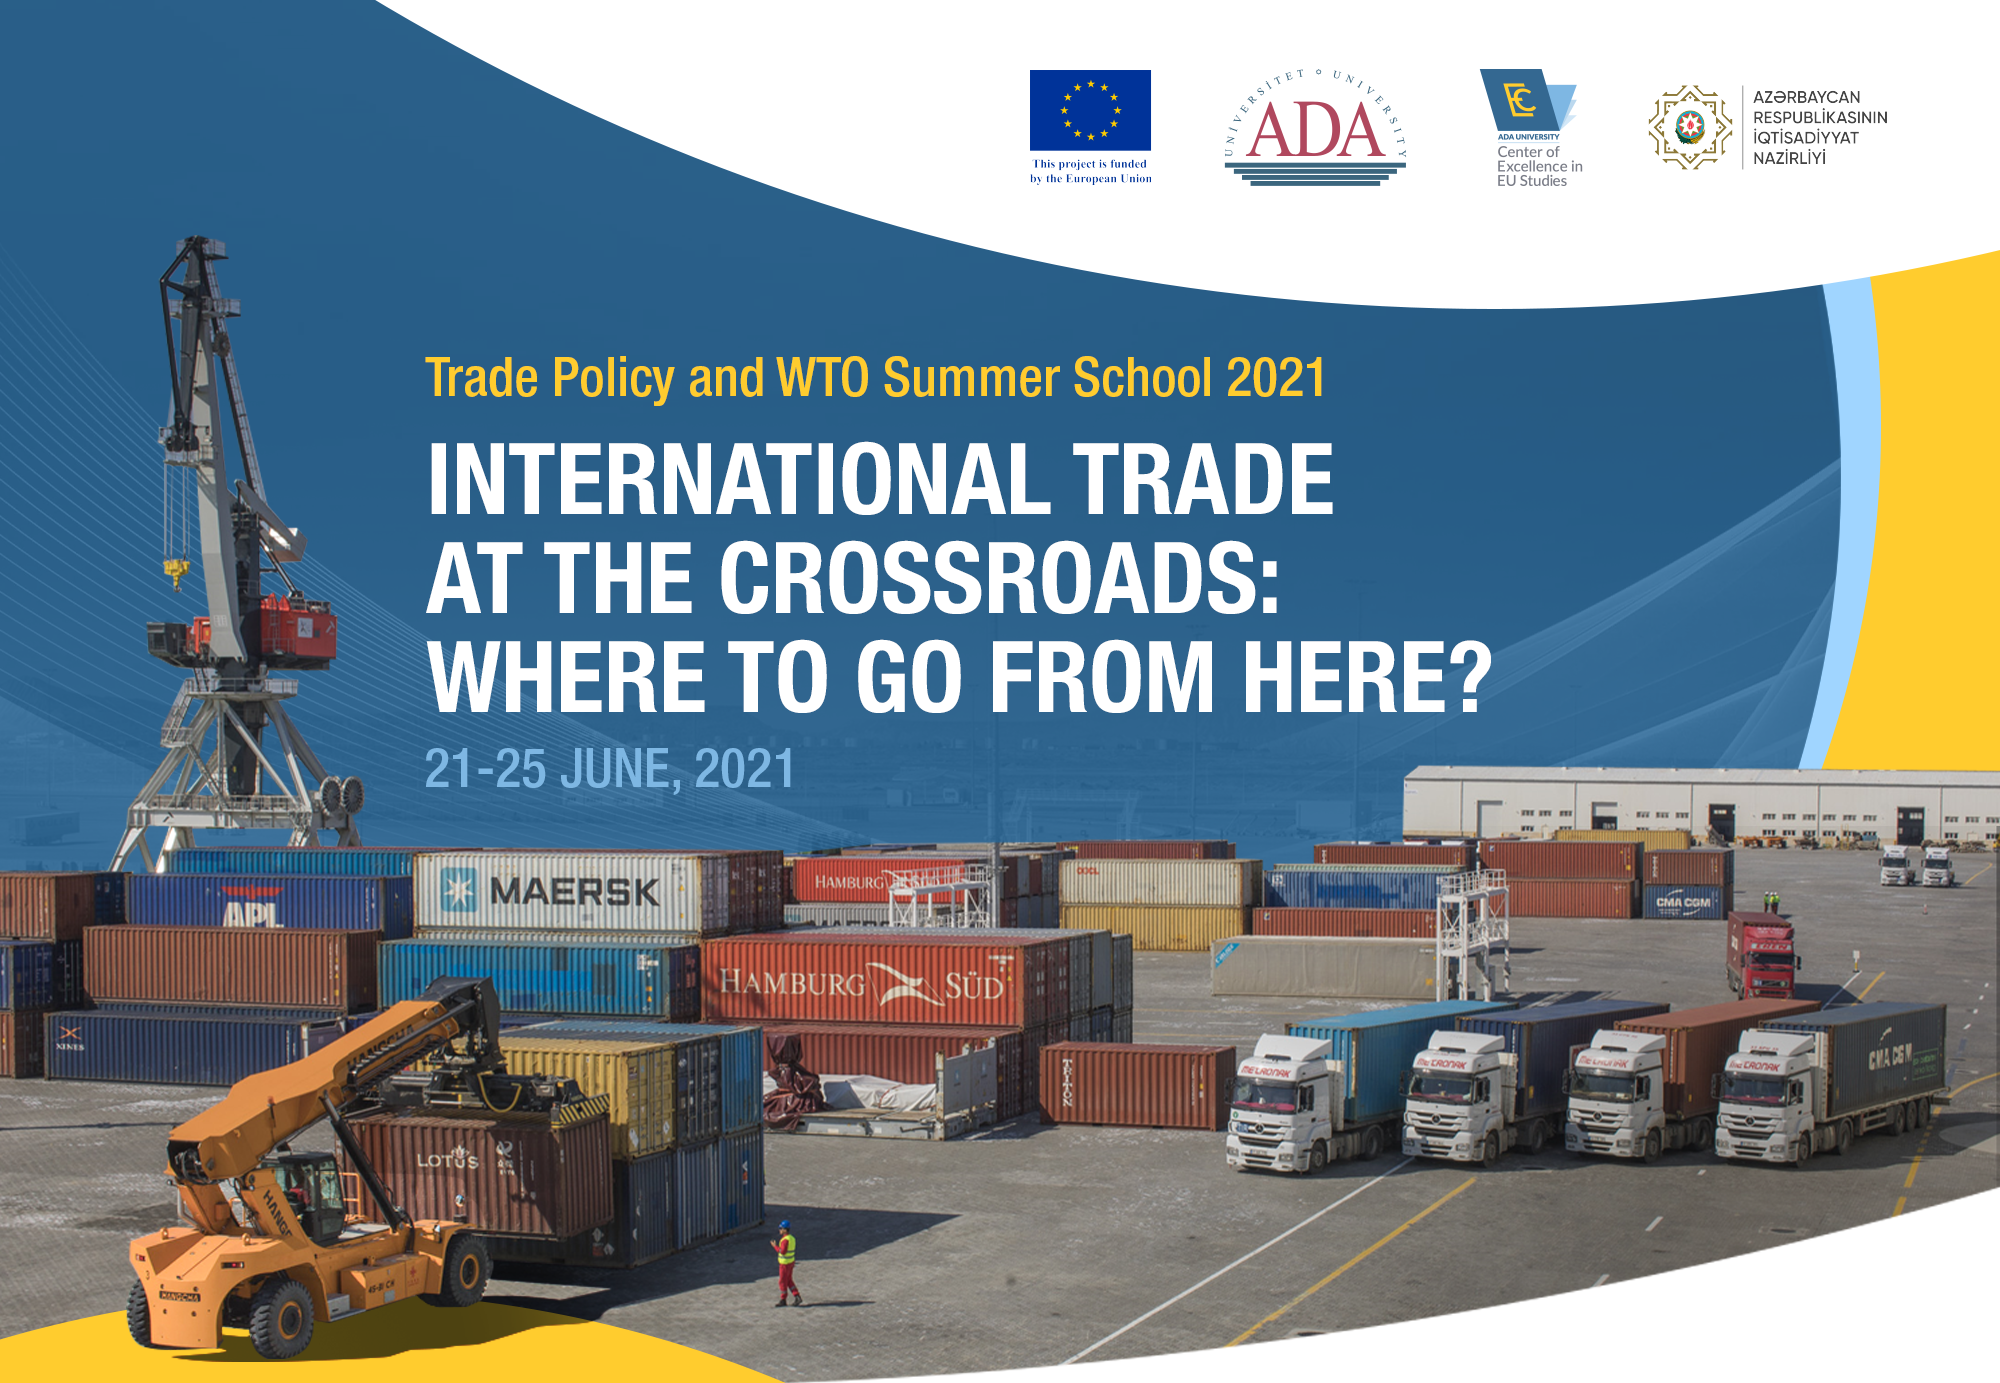 Trade Policy and WTO Summer School 2021  “International trade at the crossroads: Where to go from here?” 